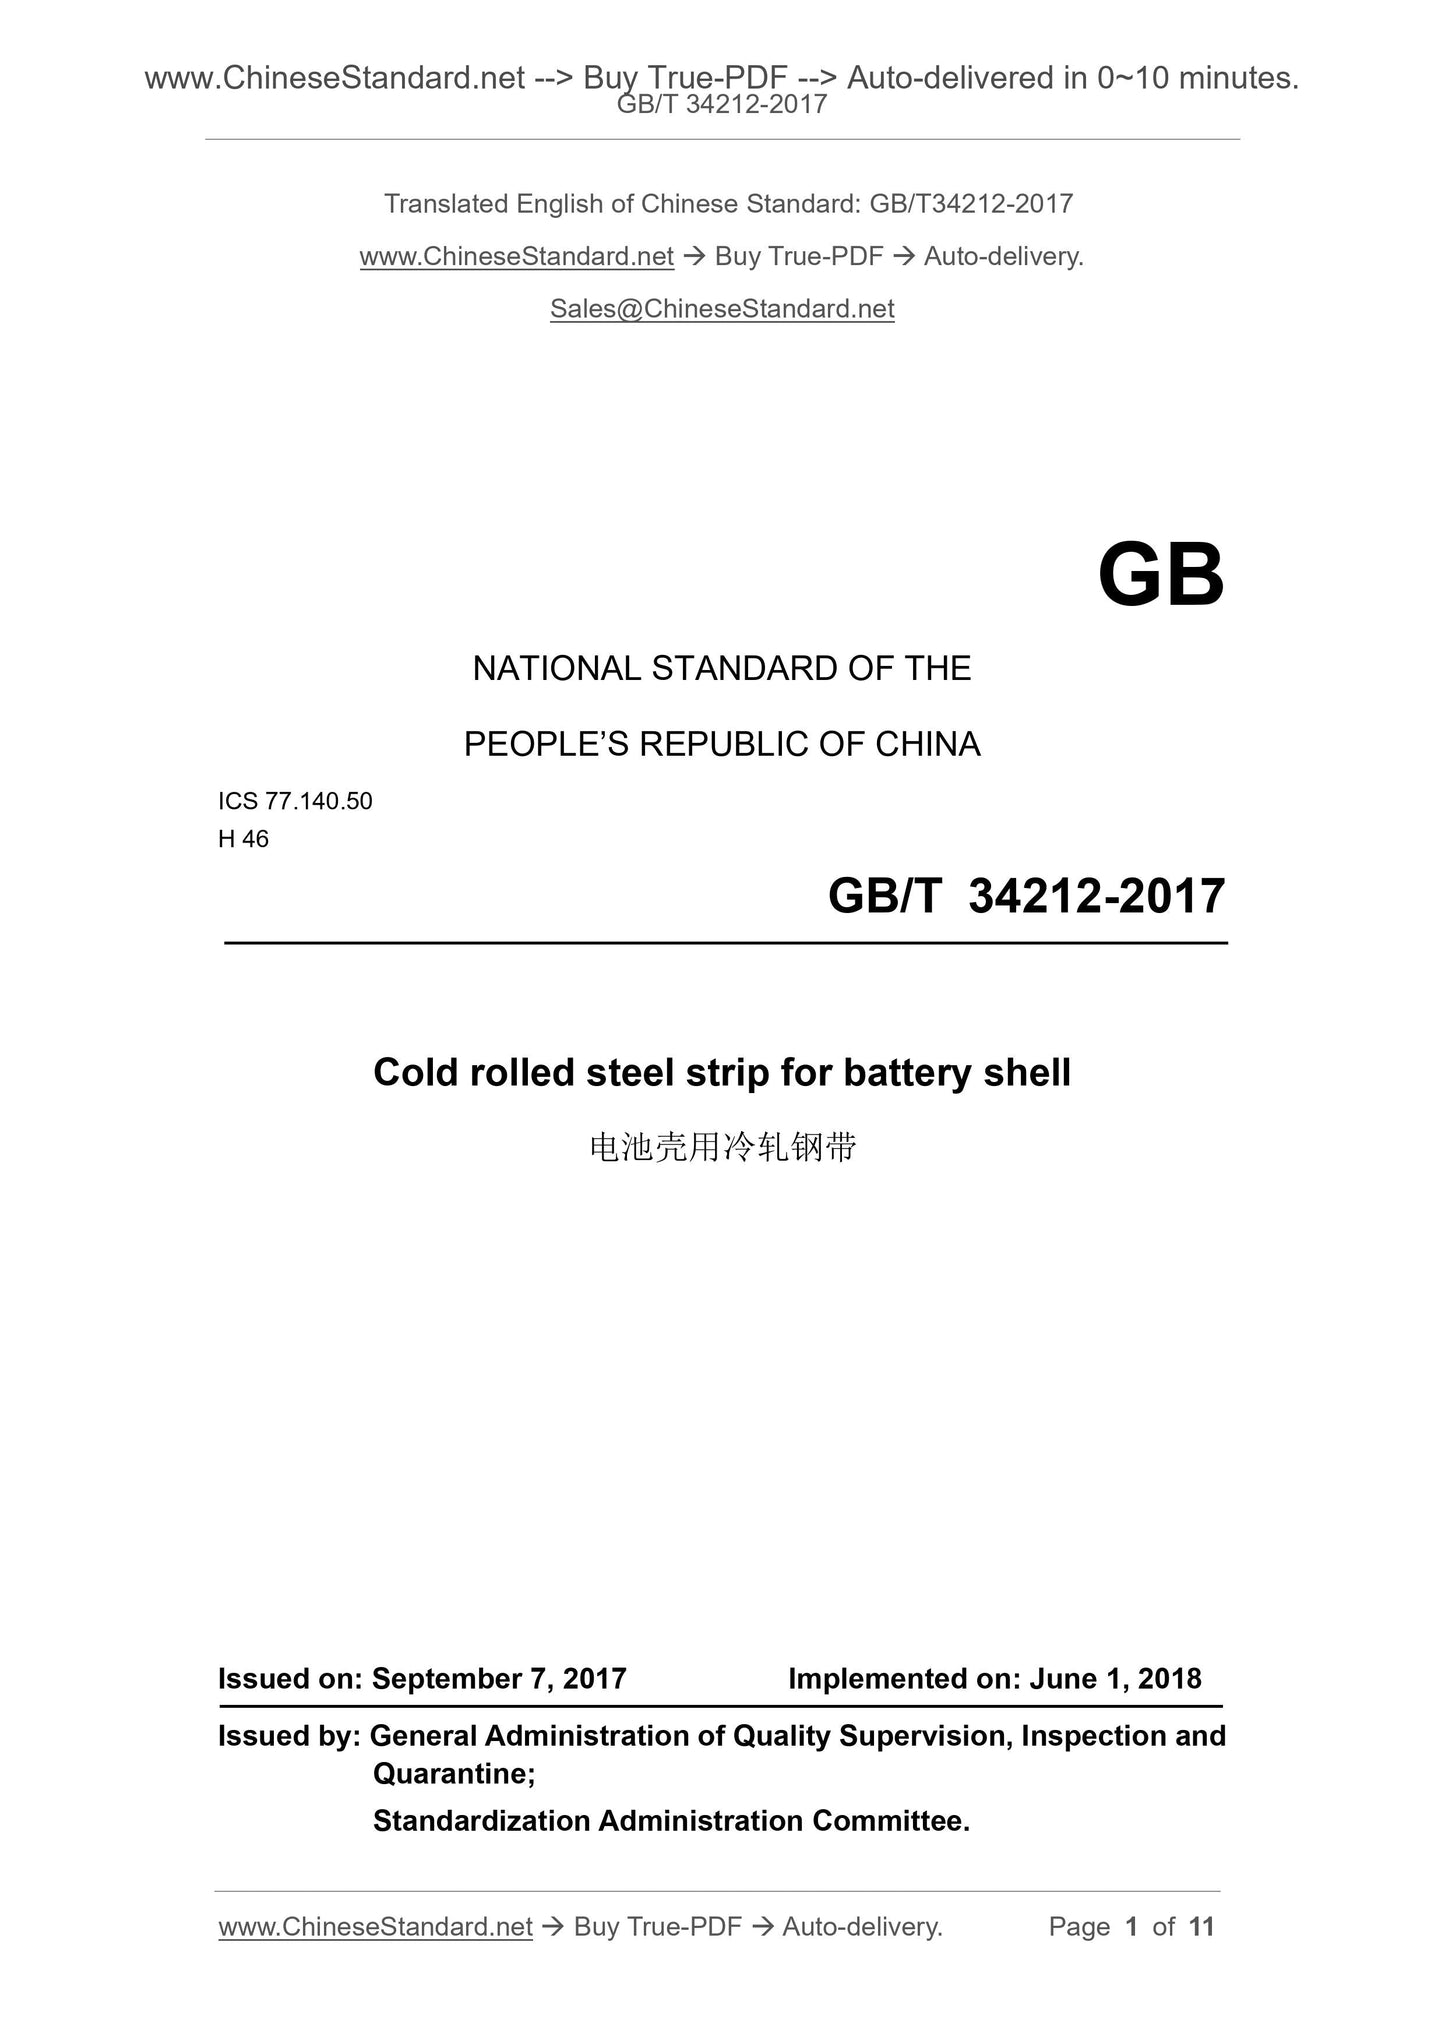 GB/T 34212-2017 Page 1